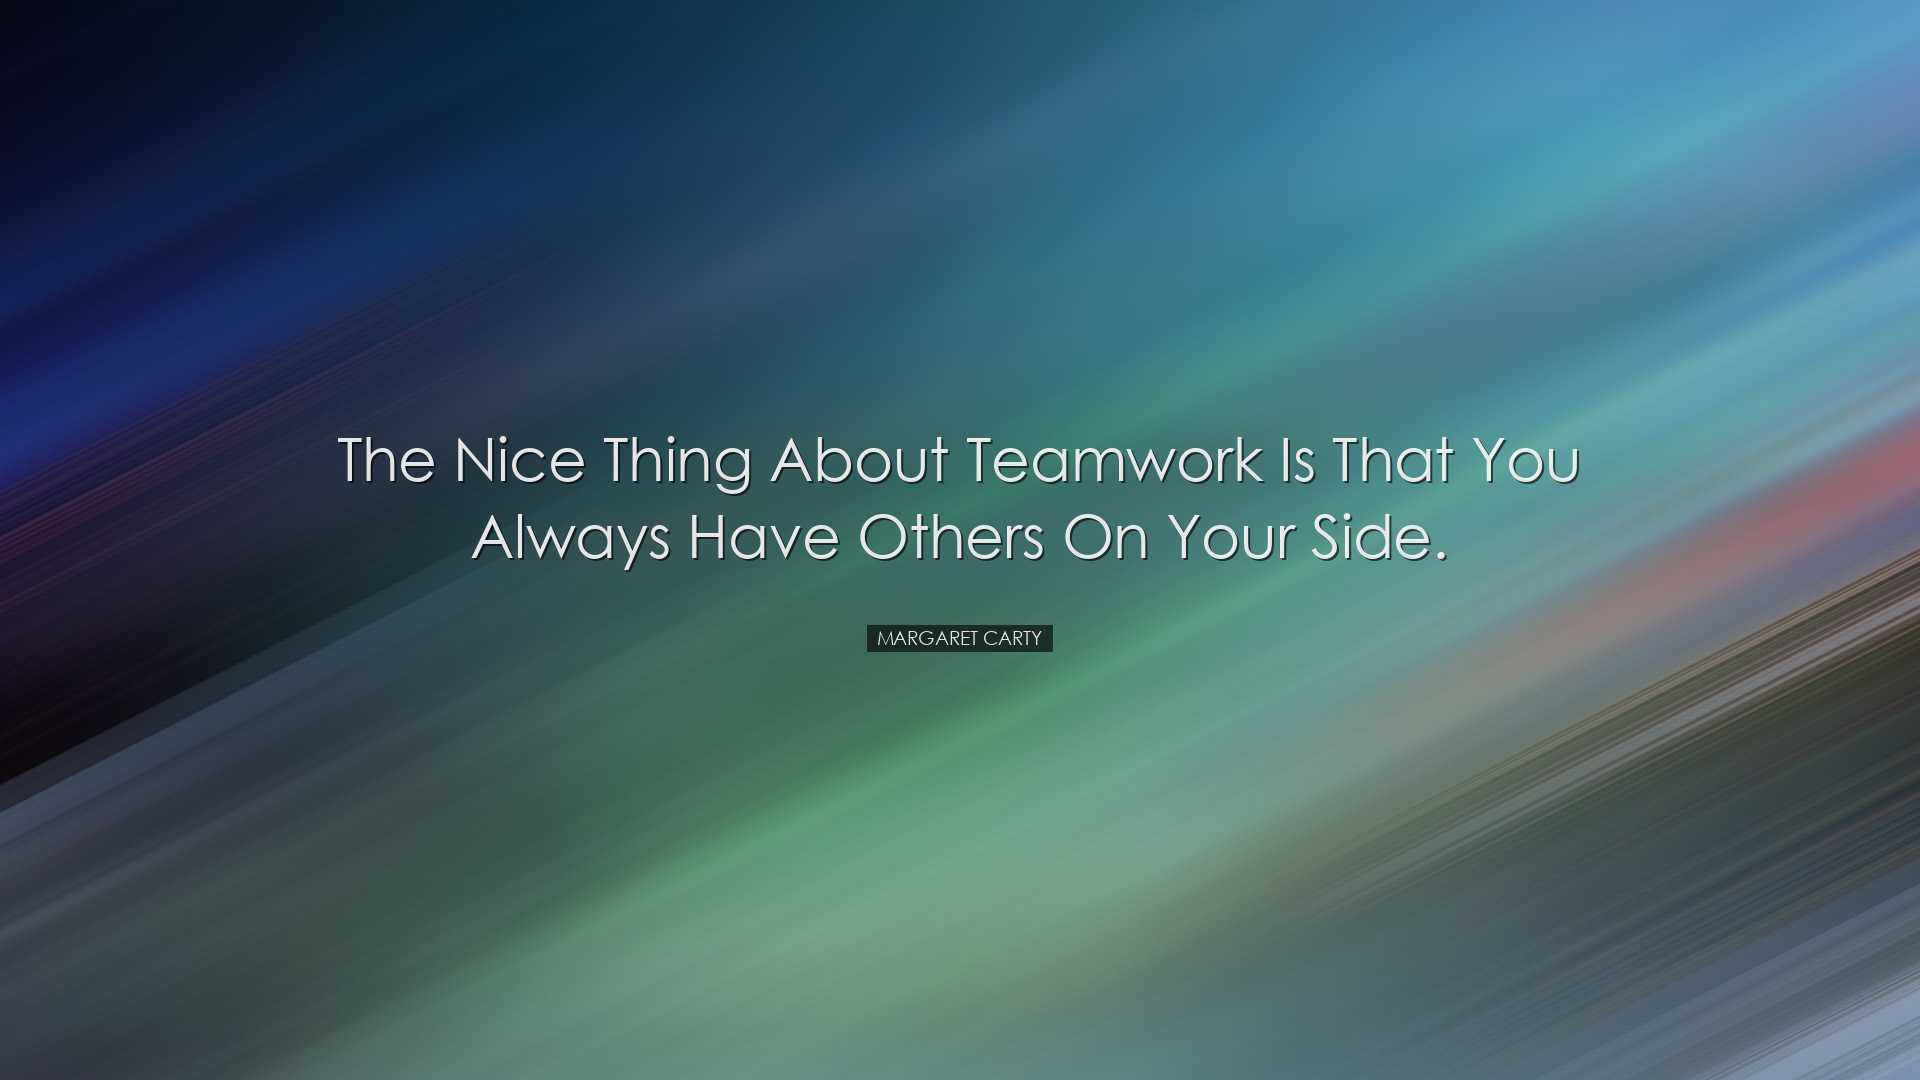 The nice thing about teamwork is that you always have others on yo